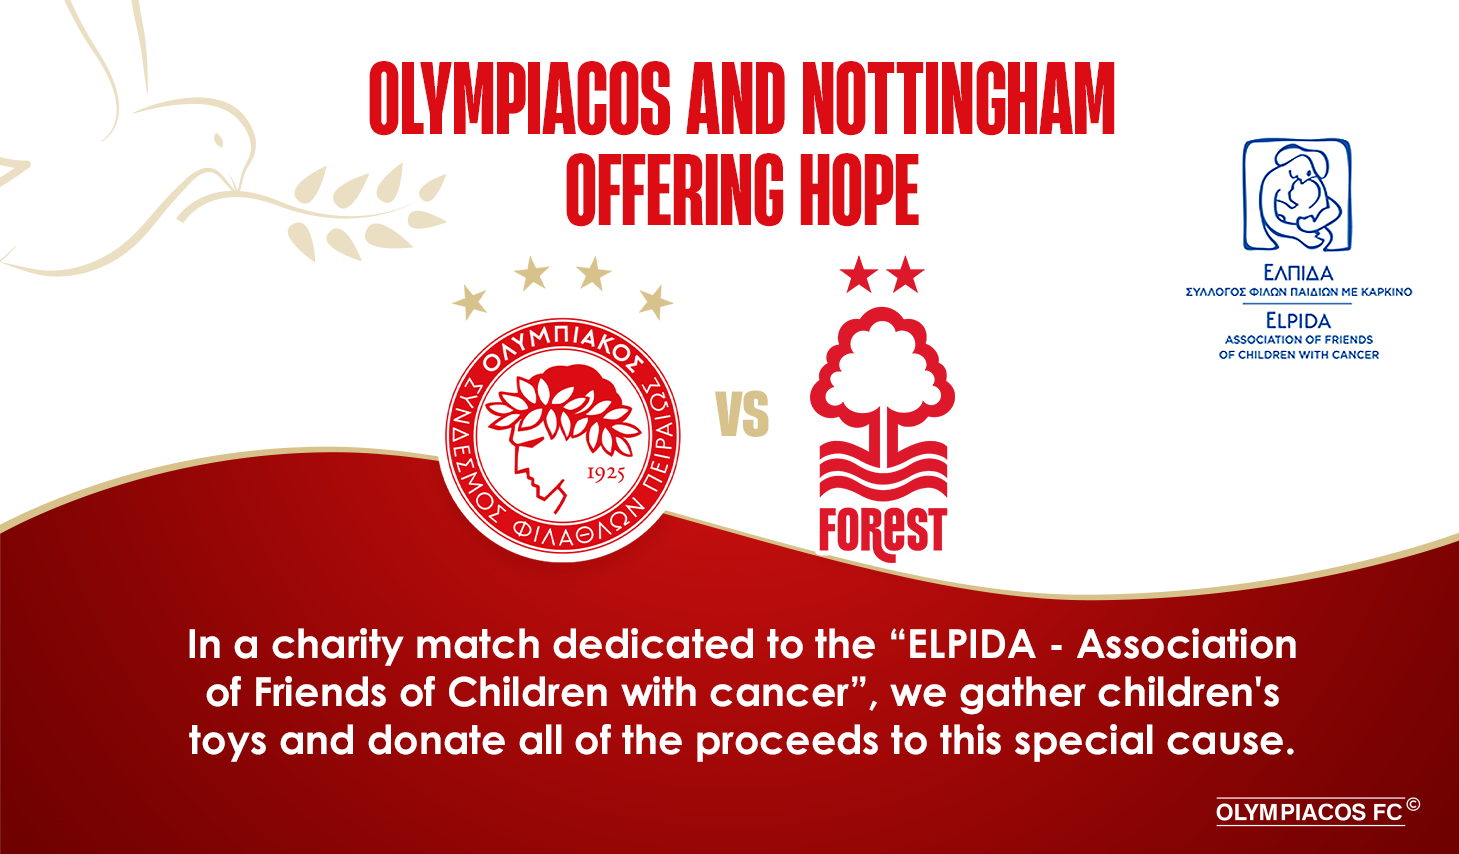 Olympiacos and Nottingham offering HOPE